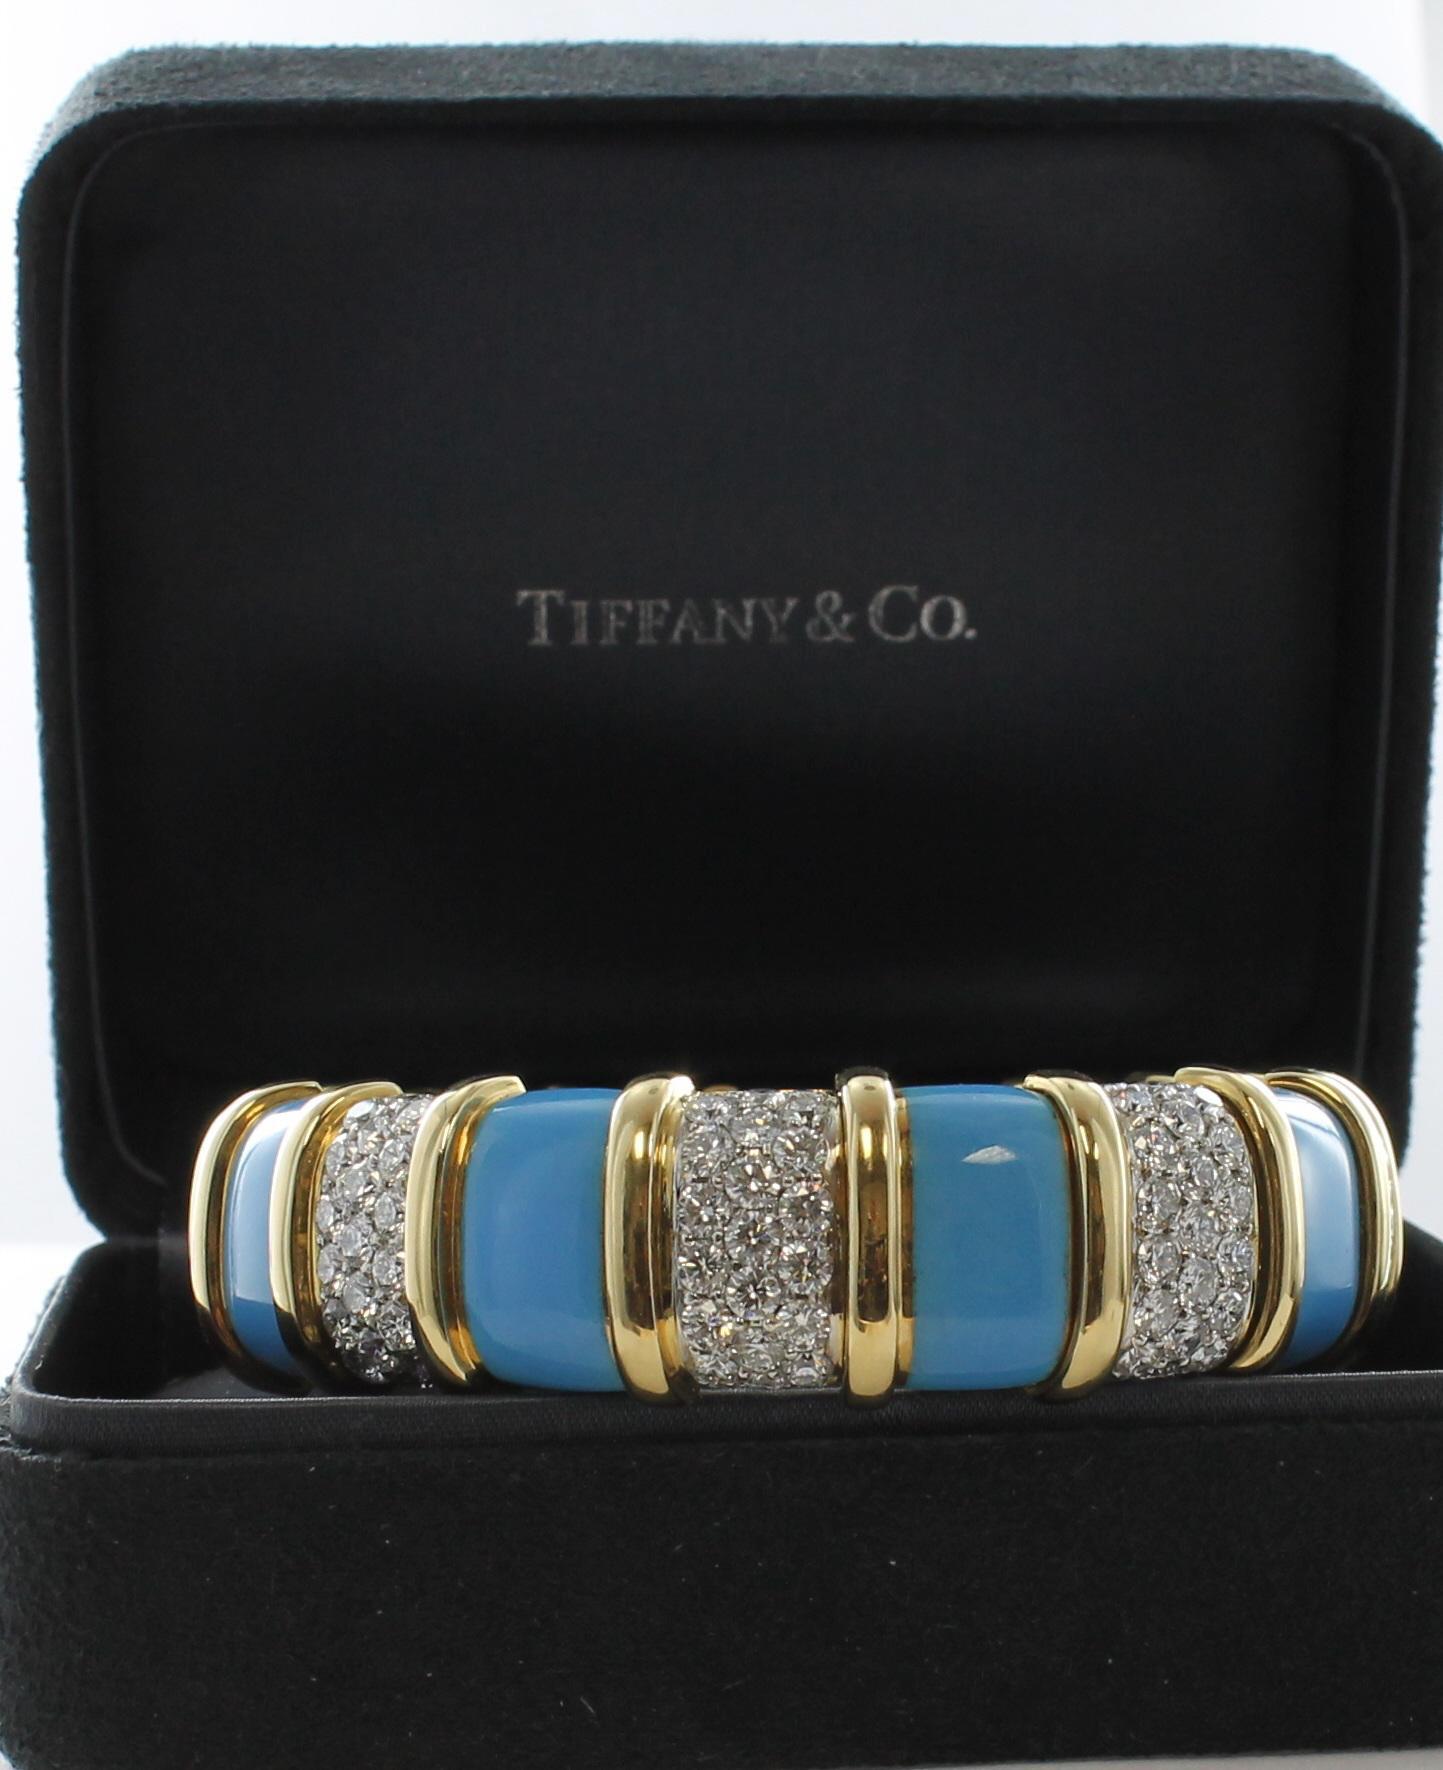 Tiffany & Co. Turquoise Paillone Enamel and Diamond Schlumberger Bracelet In Excellent Condition For Sale In Atlanta, GA